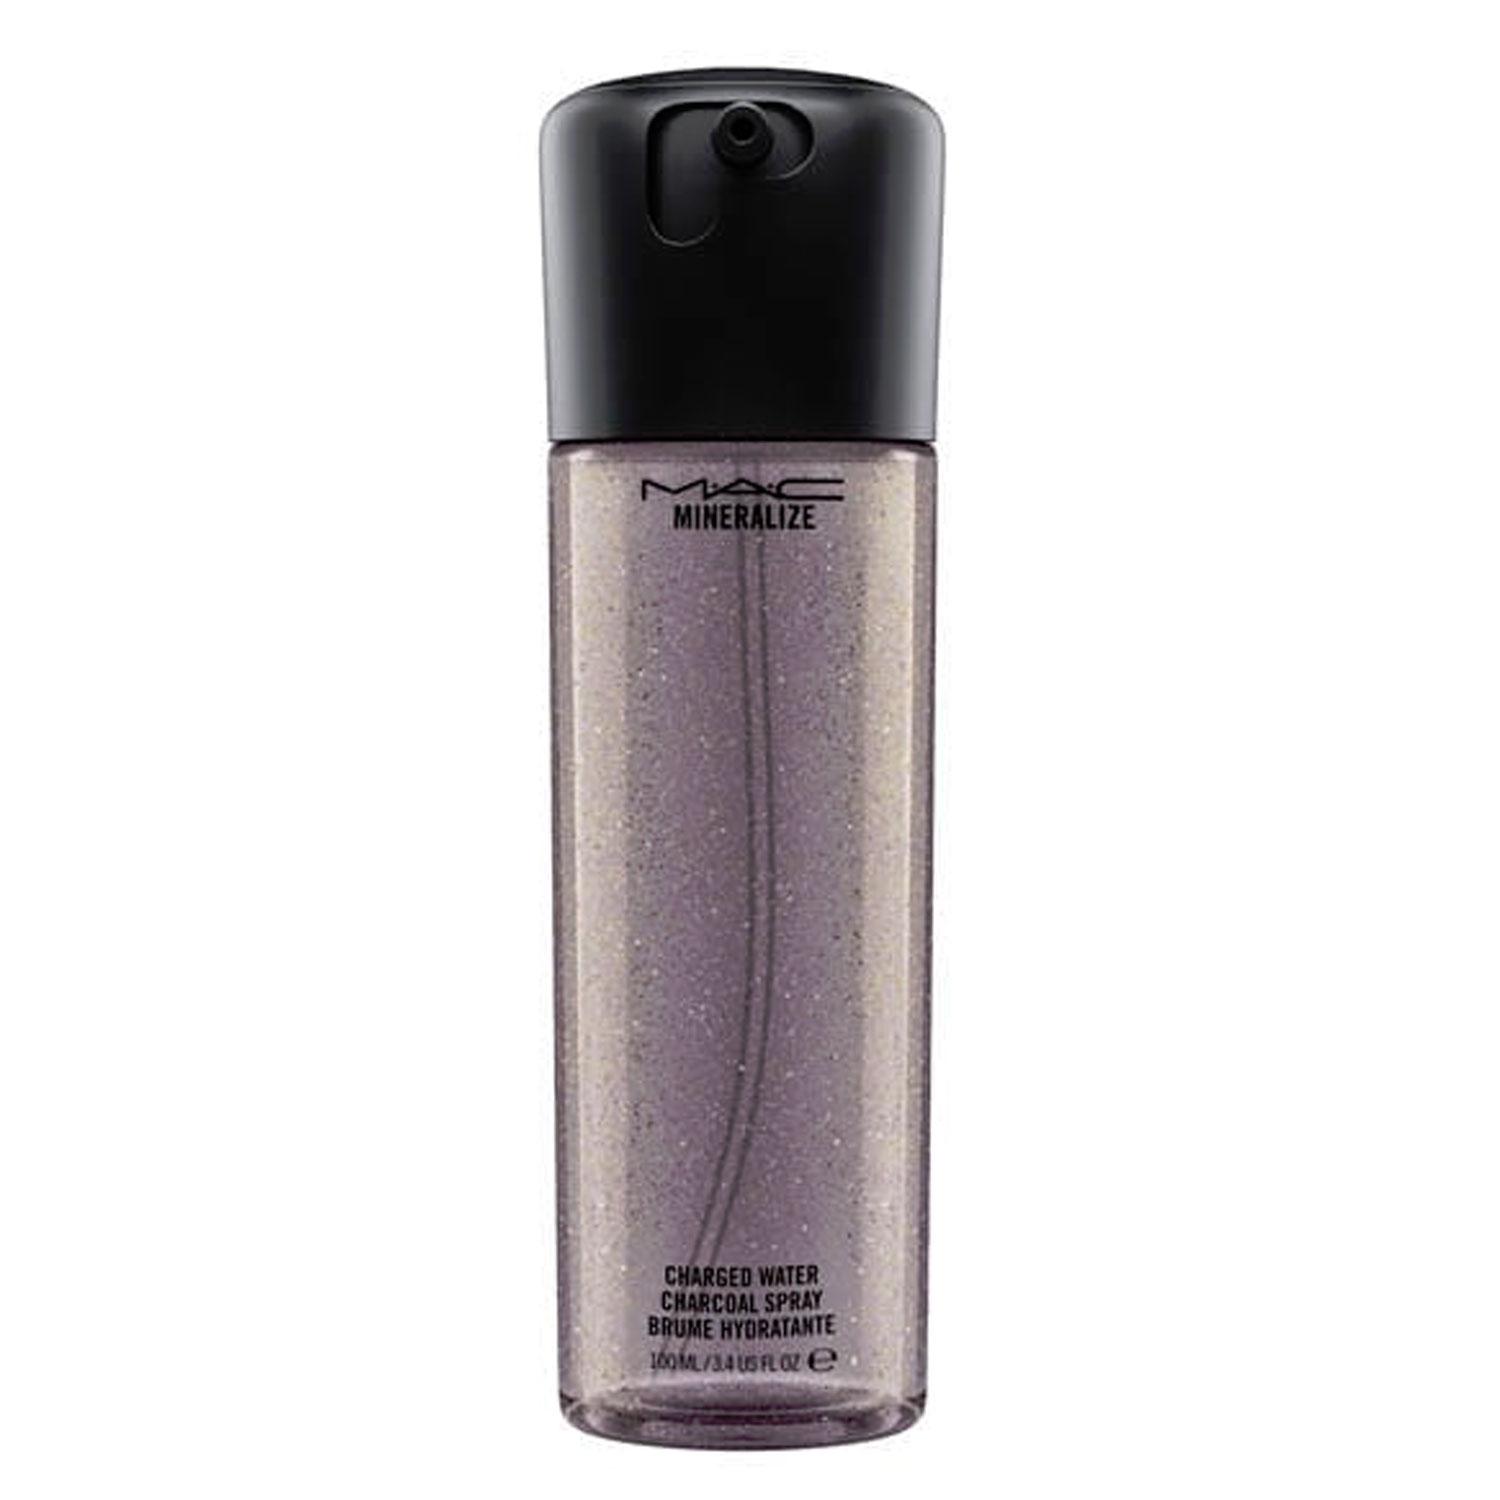 M·A·C Skin Care - Mineralize Charged Water Charcoal Spray